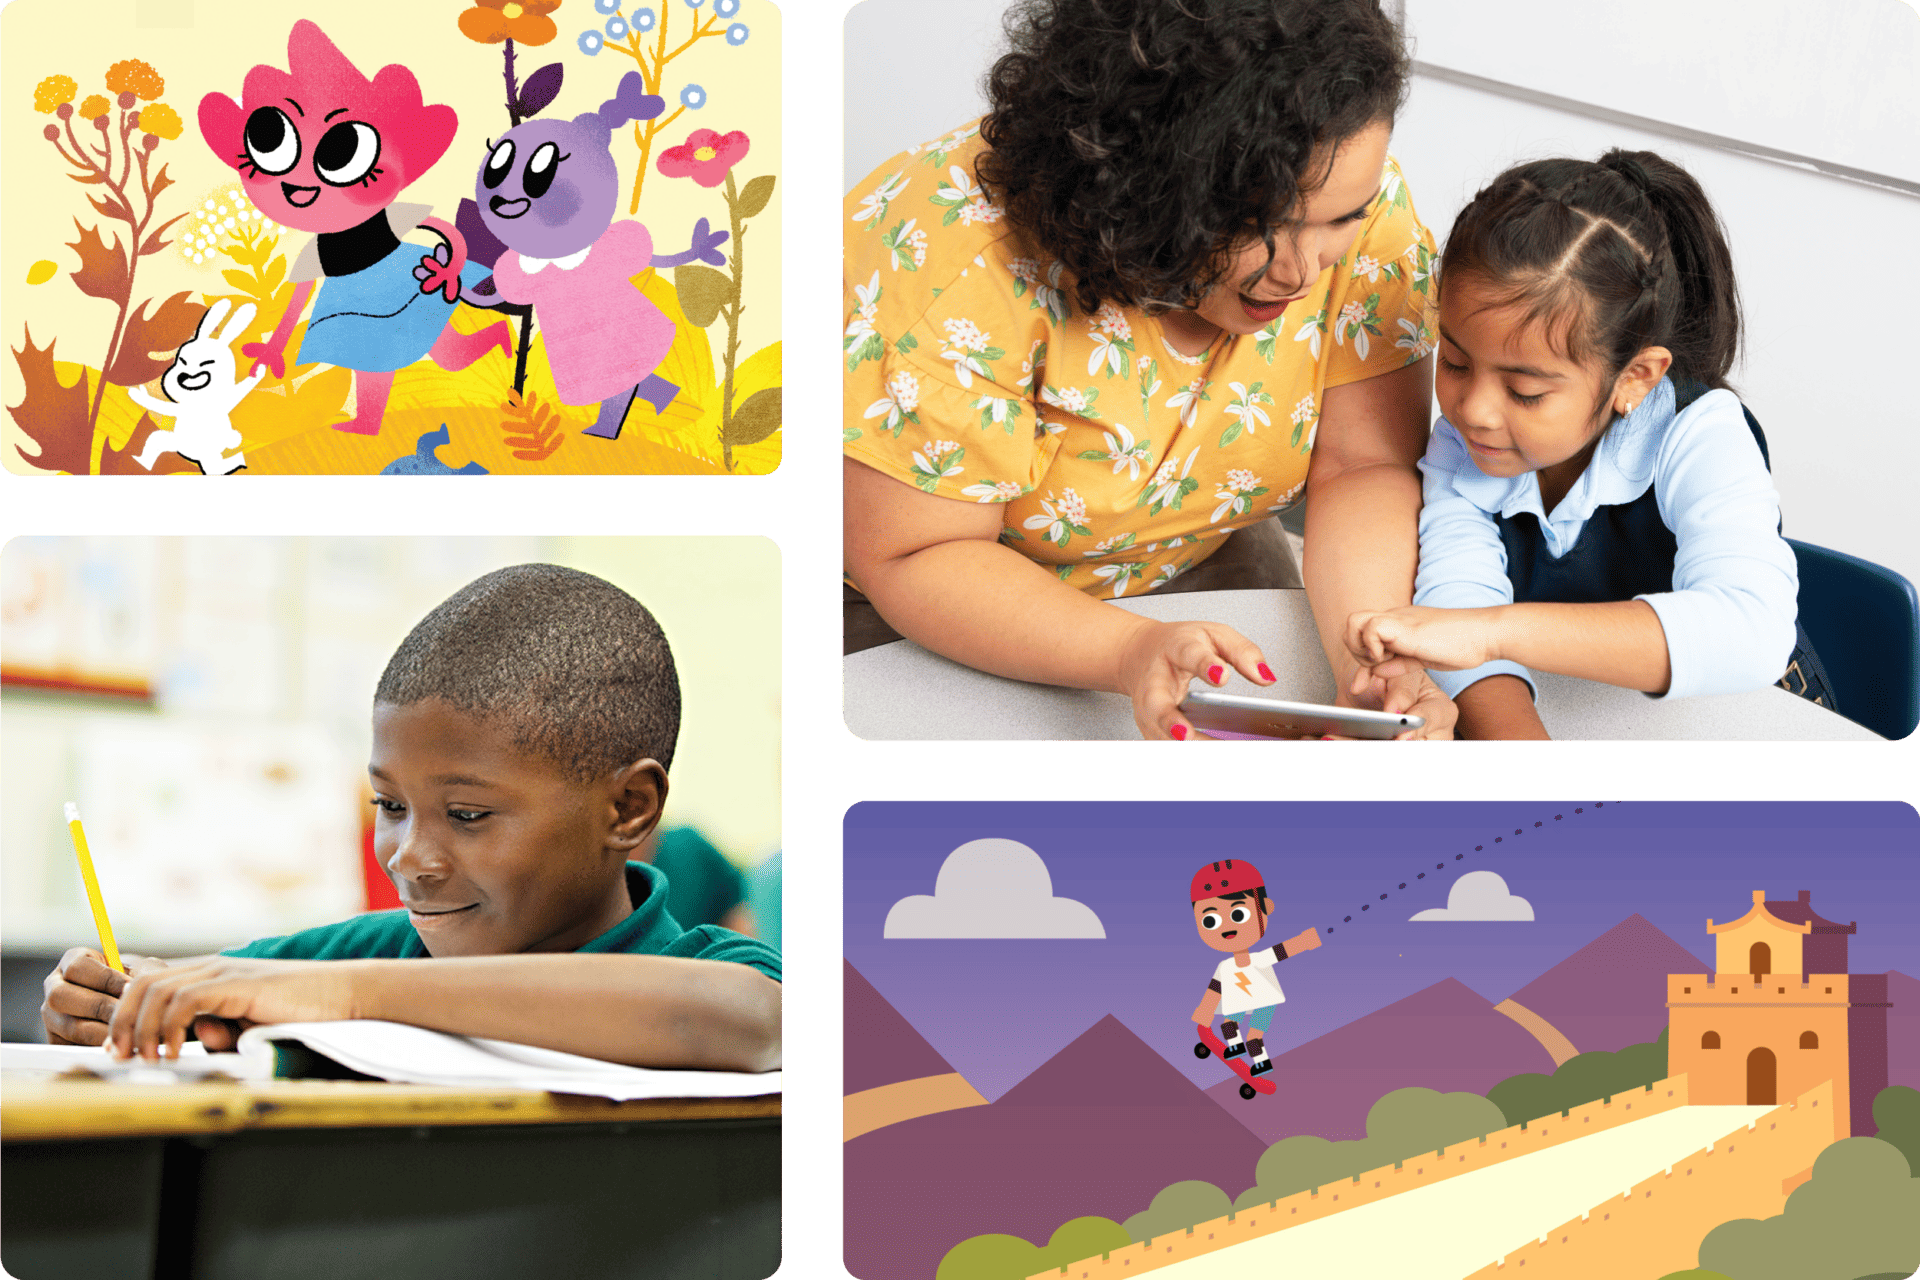 Collage of four images: cartoon animals in a forest promoting early literacy, a teacher assisting a student on a tablet, a boy writing in a notebook, and an animated character skateboarding by a castle